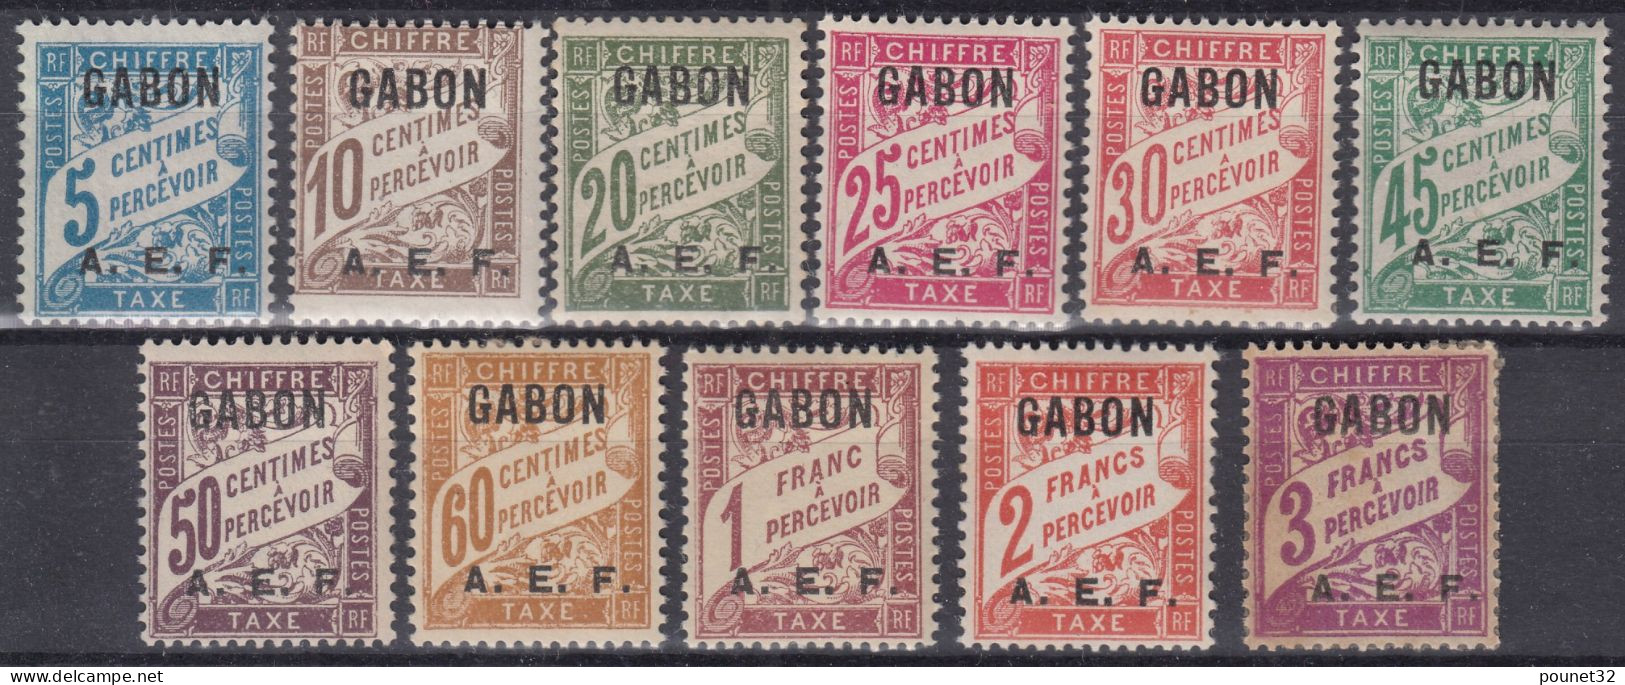 GABON SERIE TAXE COMPLETE N° 1/11 NEUFS * GOMME COLONIALE TRACE DE CHARNIERE - Postage Due